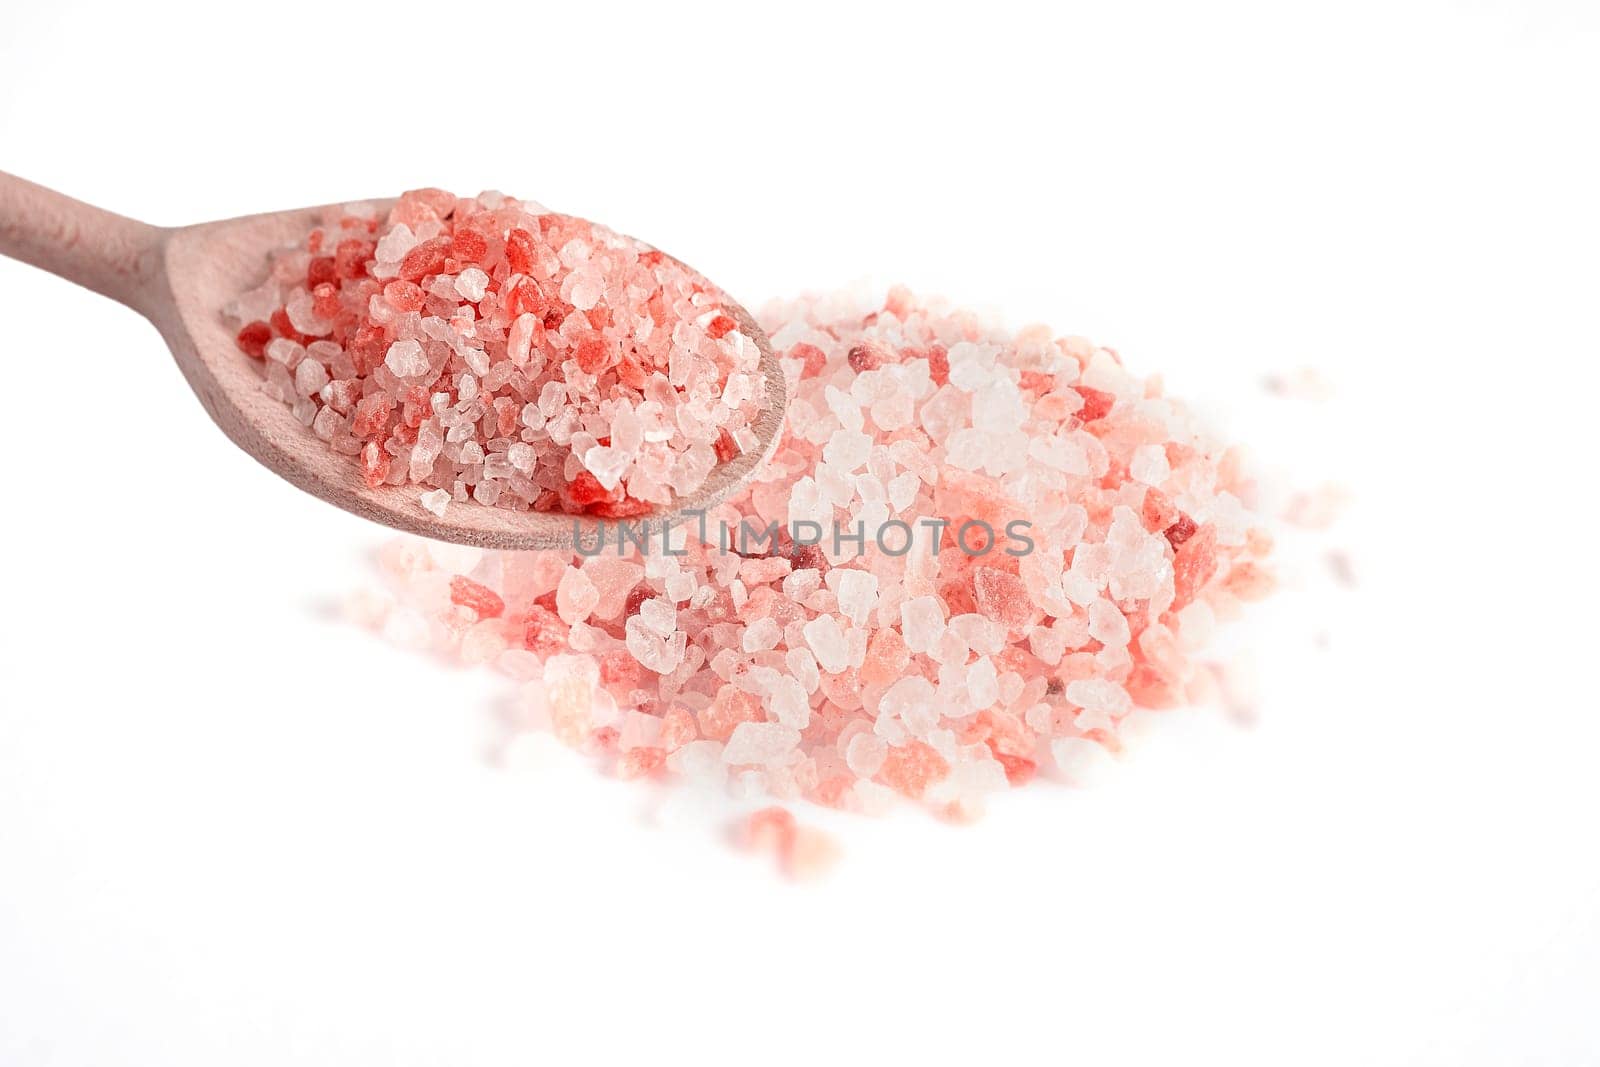 Pink Himalayan salt in wooden spoon on white background by Annavish